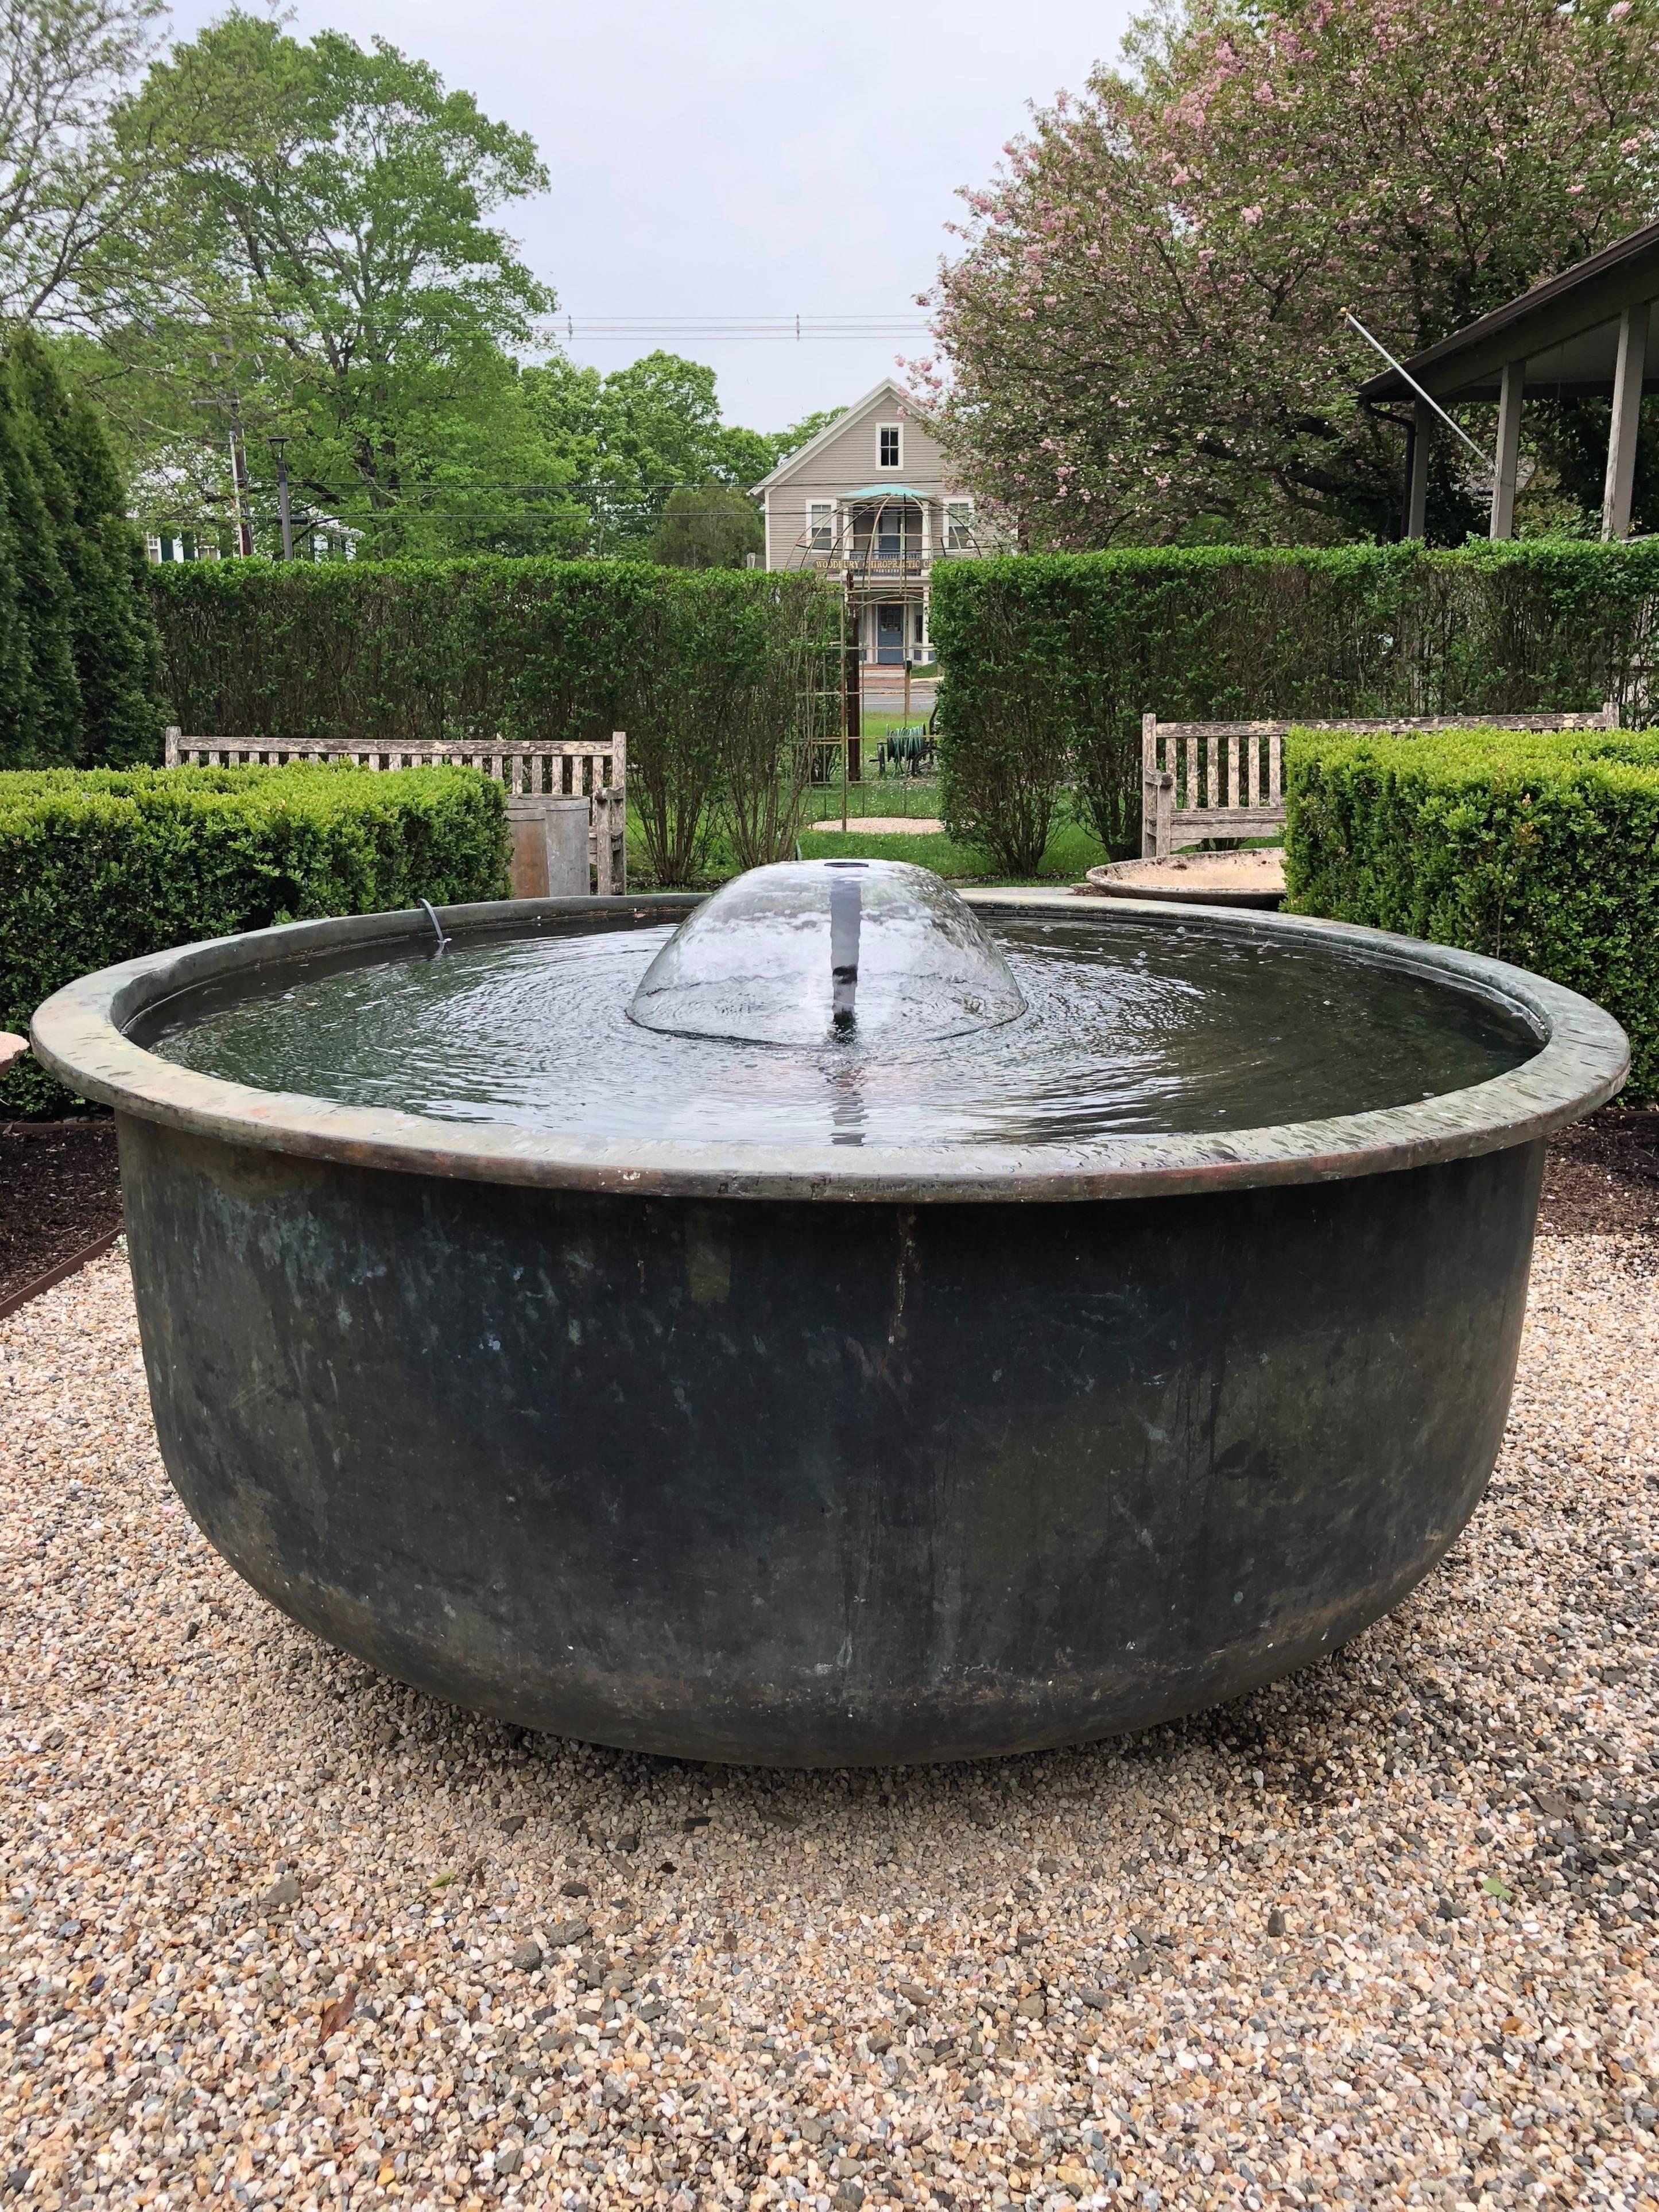 What a find! Made of heavy copper with an iron ring underside the lip, this huge tub was originally used to cook the milk for cheese in the late 19th century. We have had two of these in the past, but this is the largest we've found in an